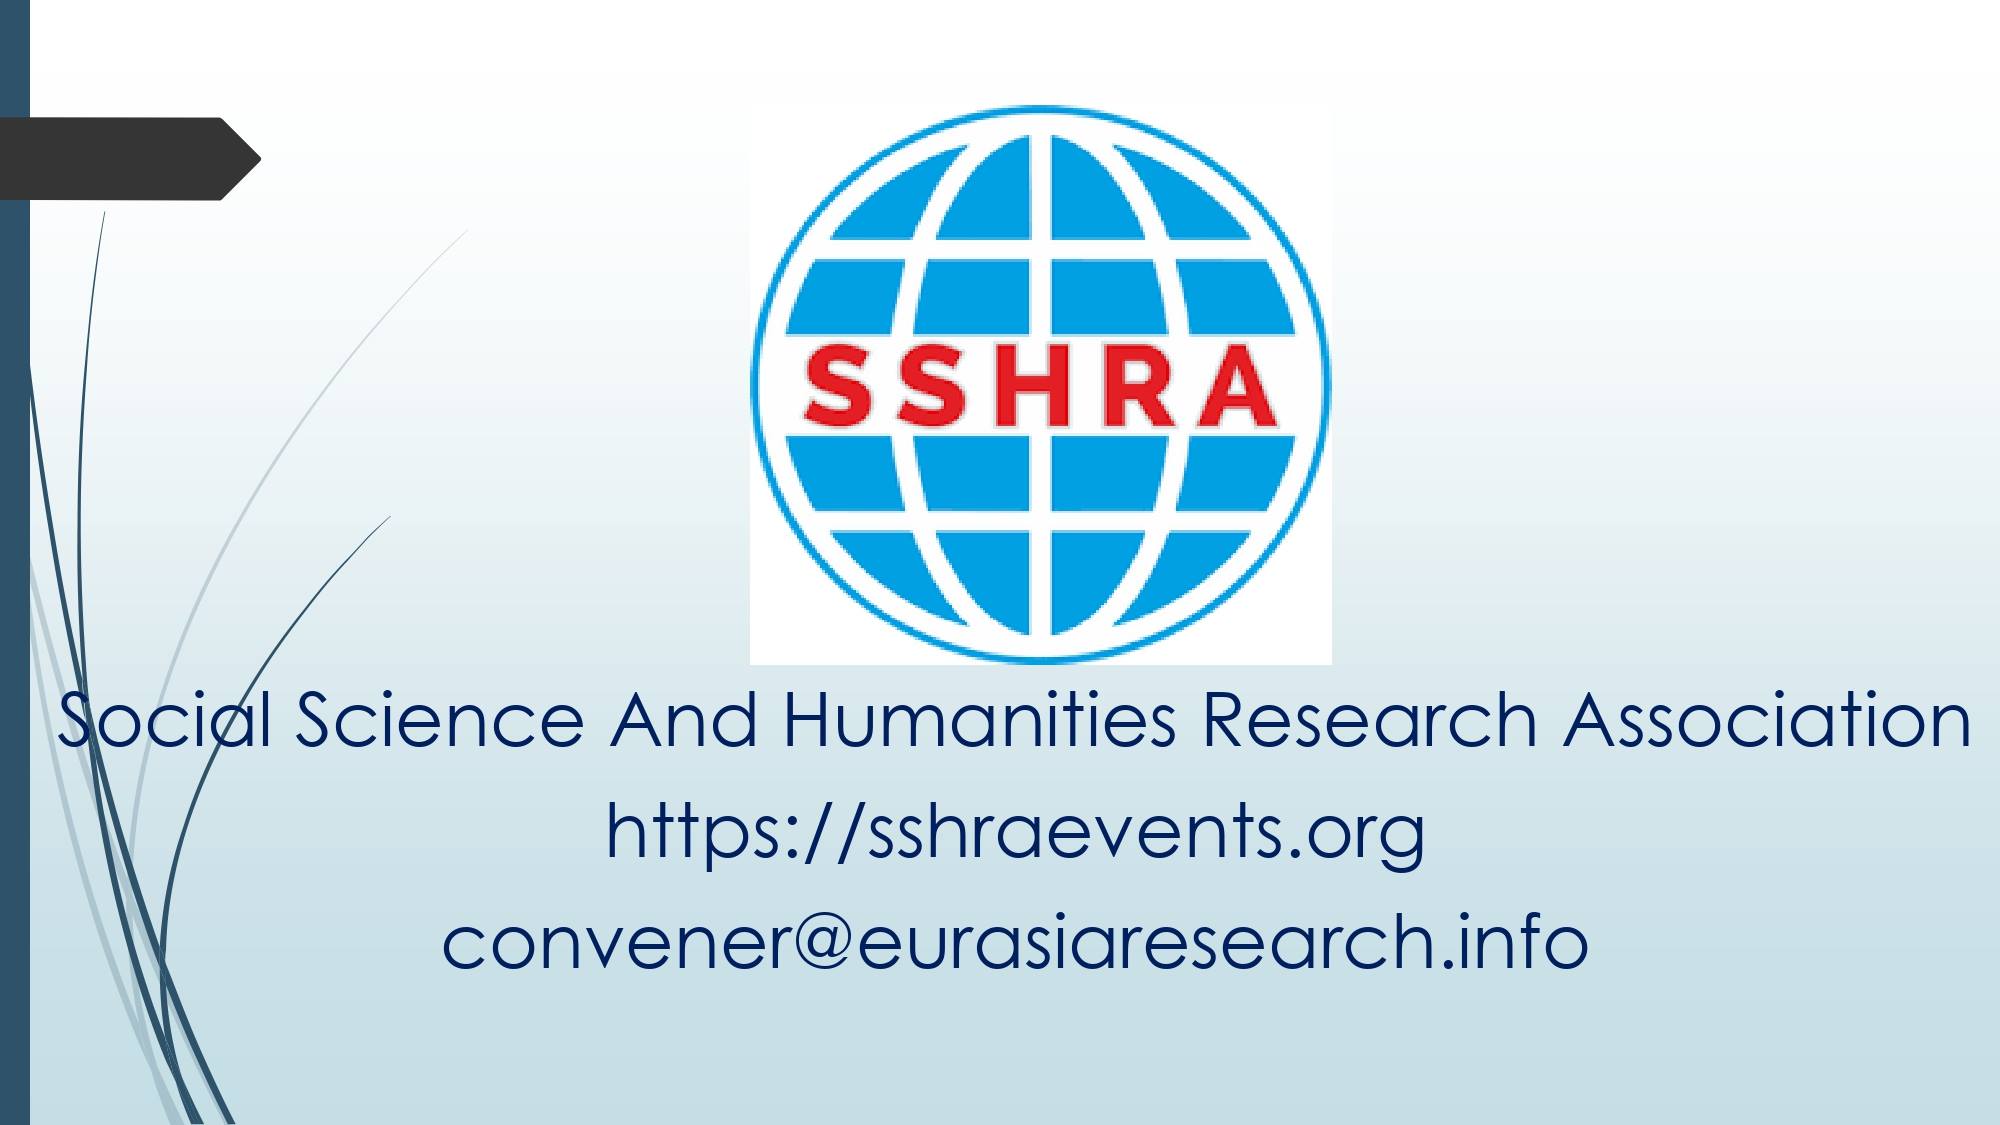 8th Singapore – International Conference on Social Science & Humanities (ICSSH), 24-25 June 2021, Singapore, Central, Singapore